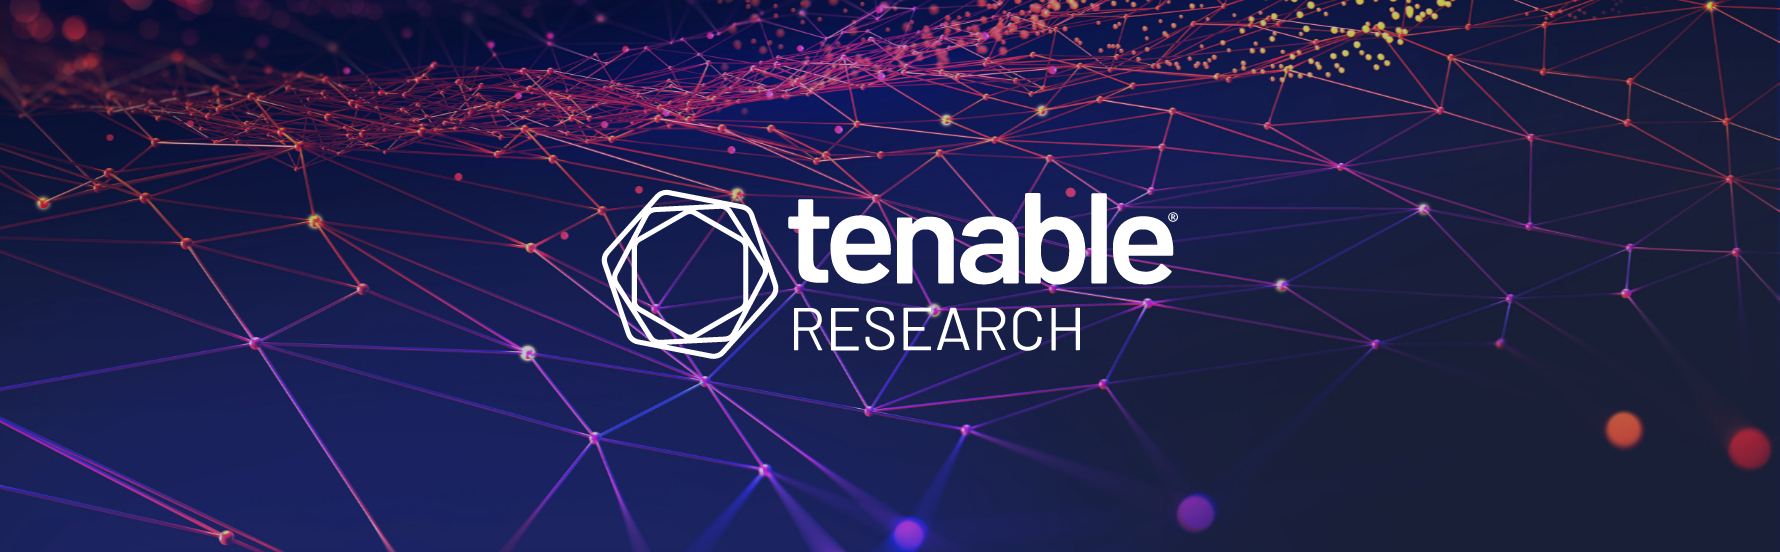 Since March 10, Tenable Research has attempted to work with Microsoft to address two serious flaws in the underlying infrastructure of Microsoft's Azure Synapse Analytics